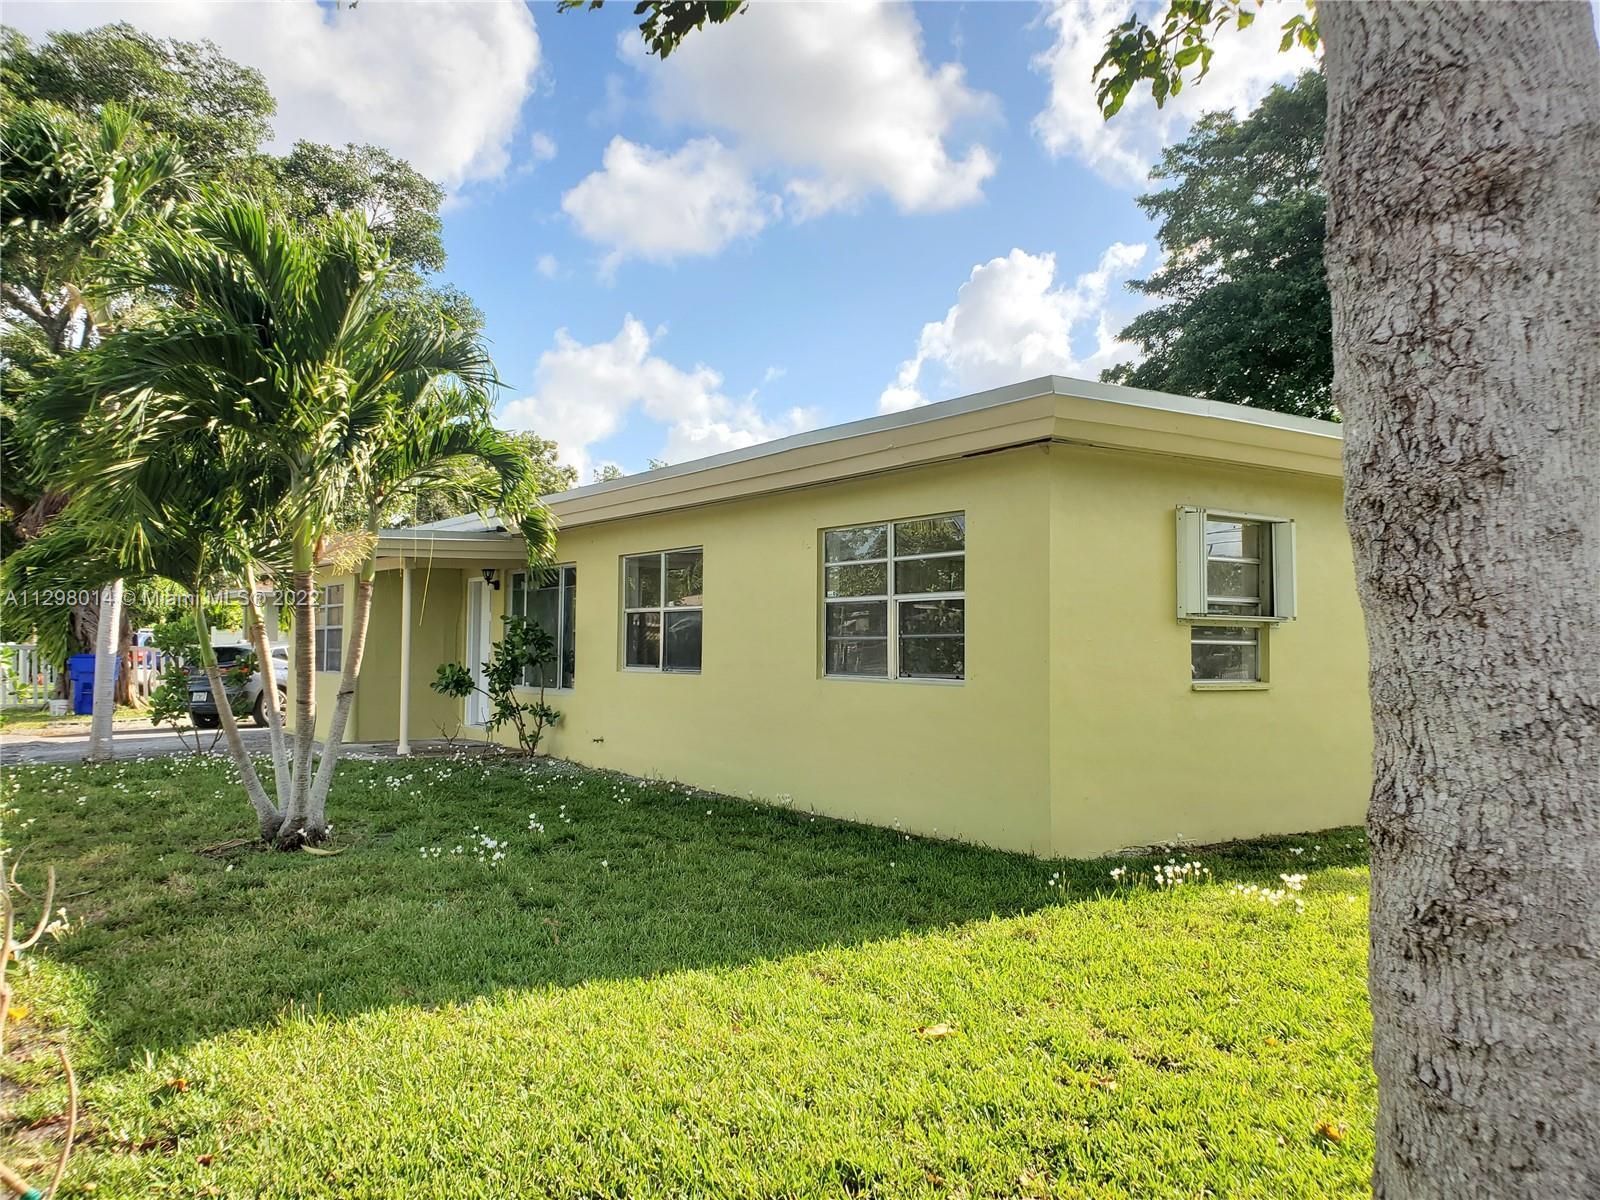 Photo of 507 N 61st Ave in Hollywood, FL